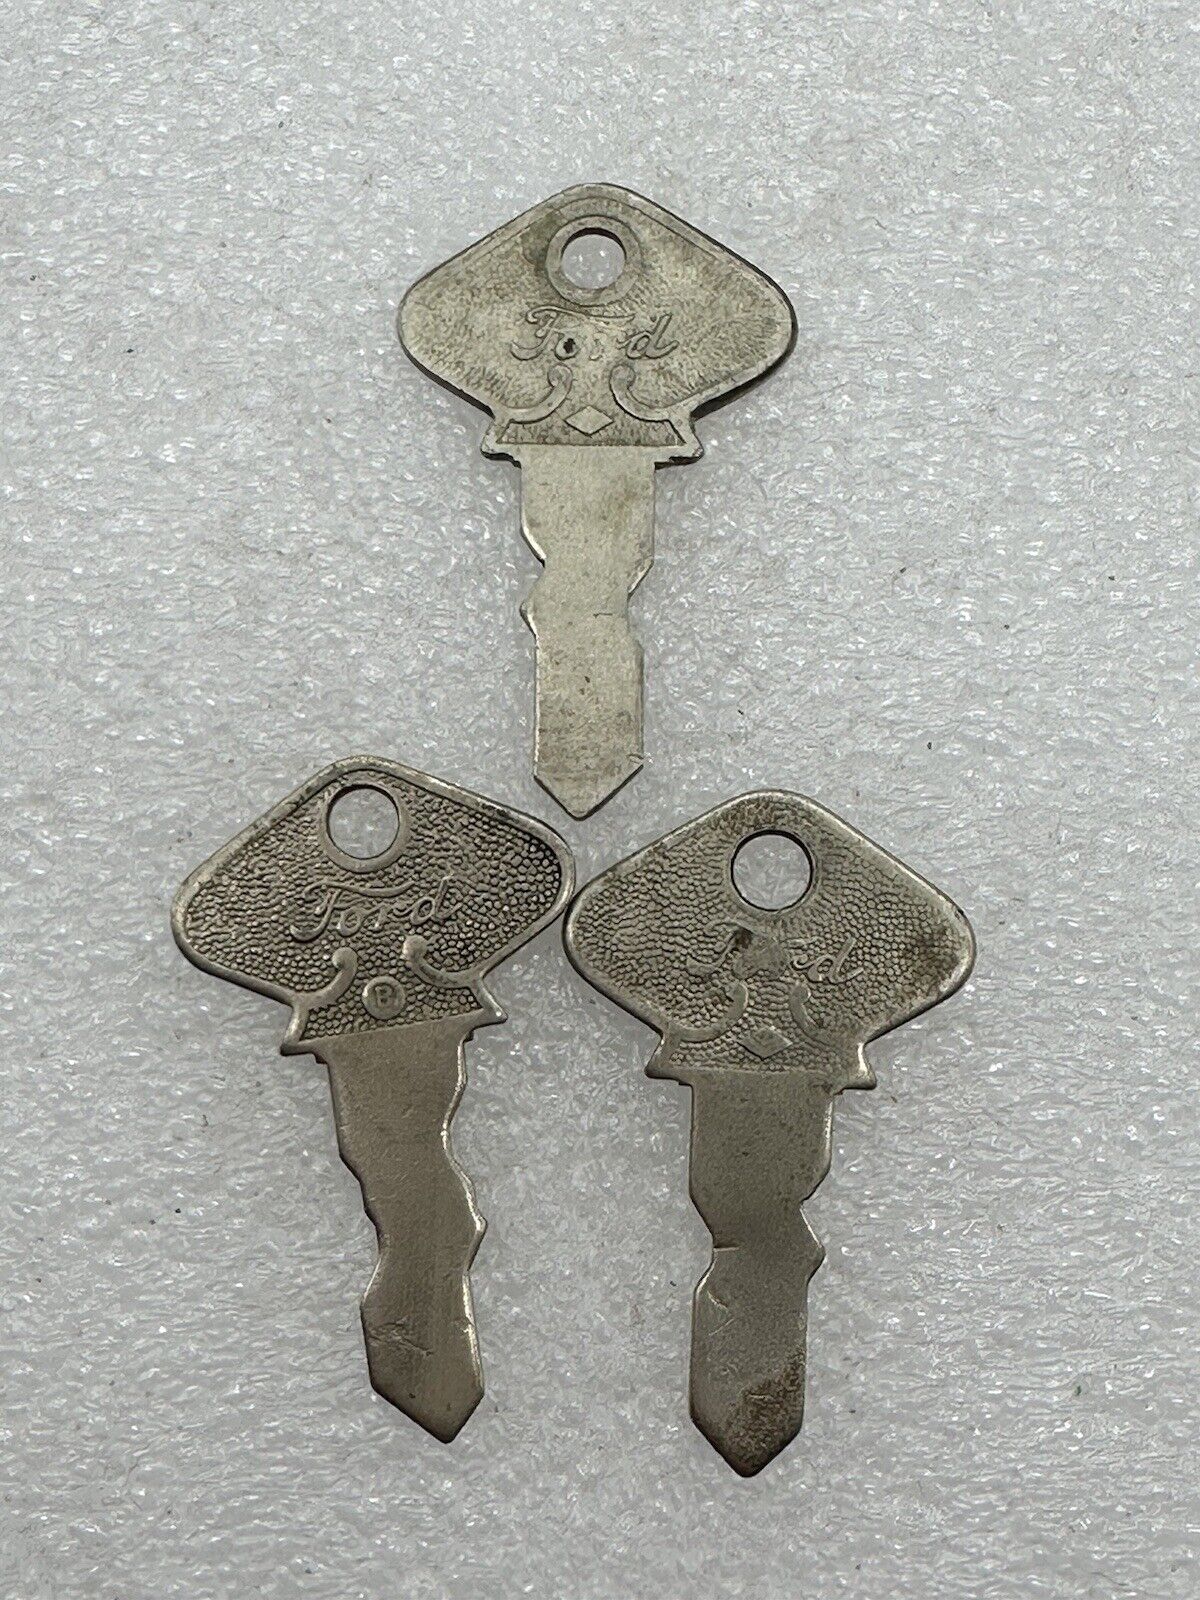 Antique Ford Model T Keys Lot Of 3 With Ford Script 51 54 58